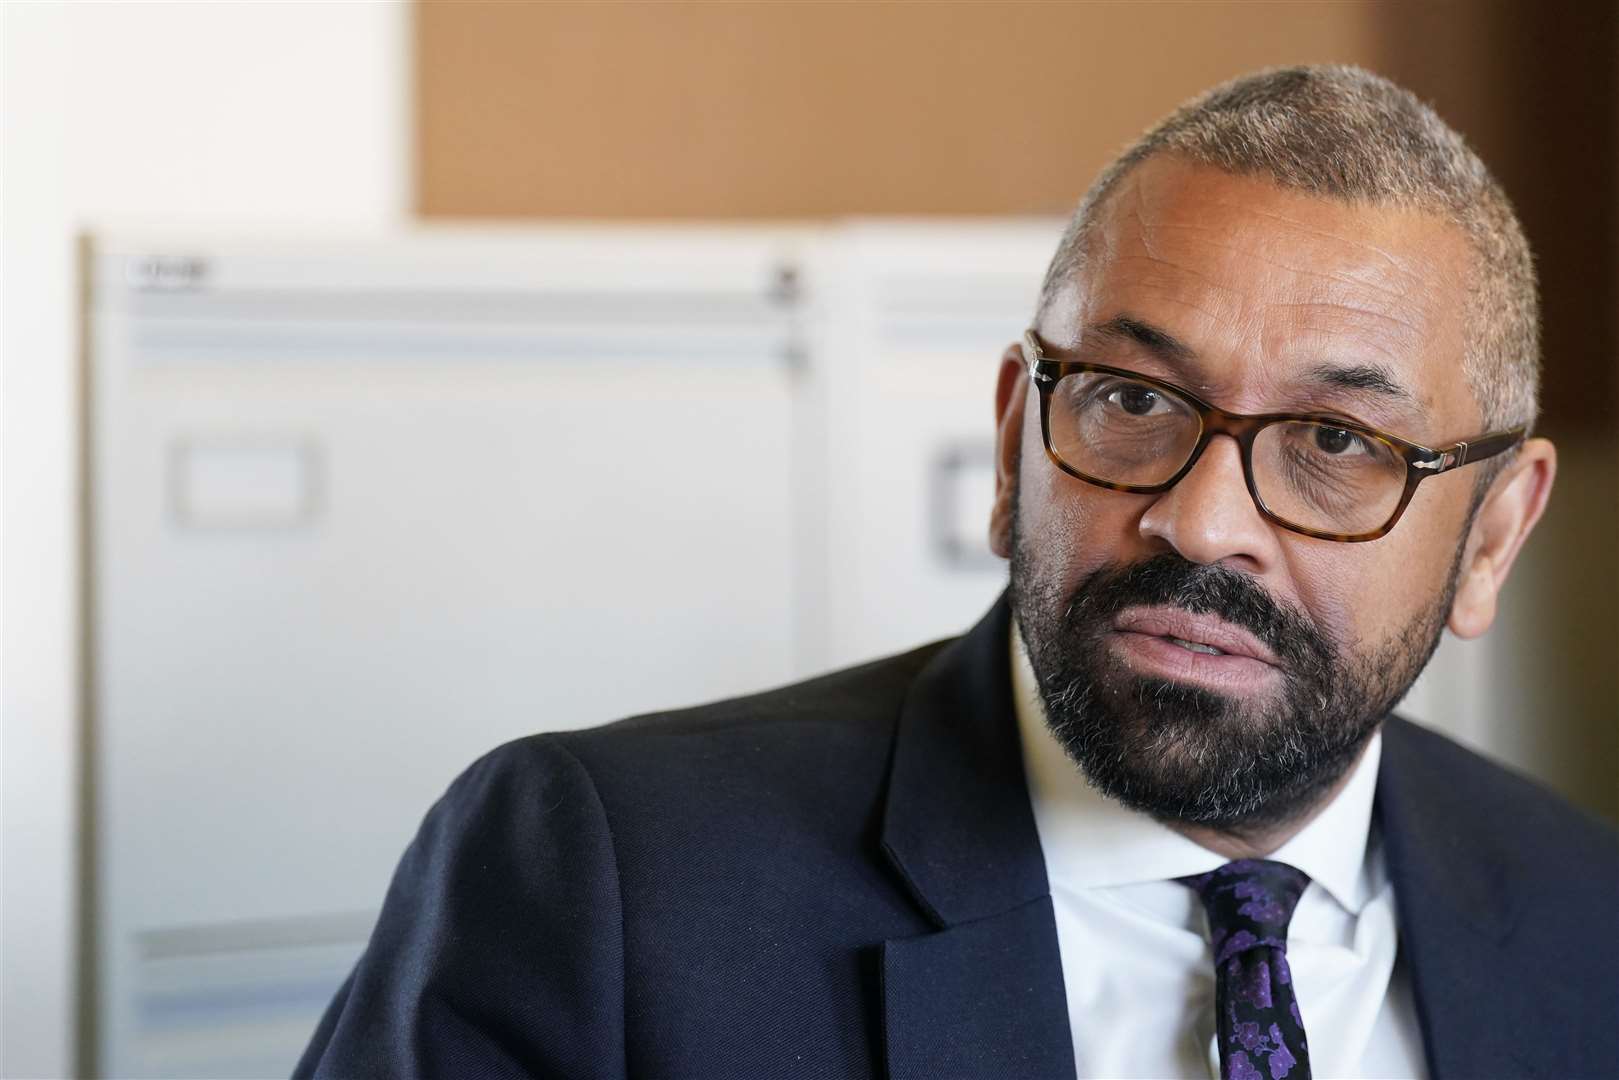 Home Secretary James Cleverly accused Labour of delaying tactics over the plan to deport asylum seekers to Rwanda (Joe Giddens/PA)